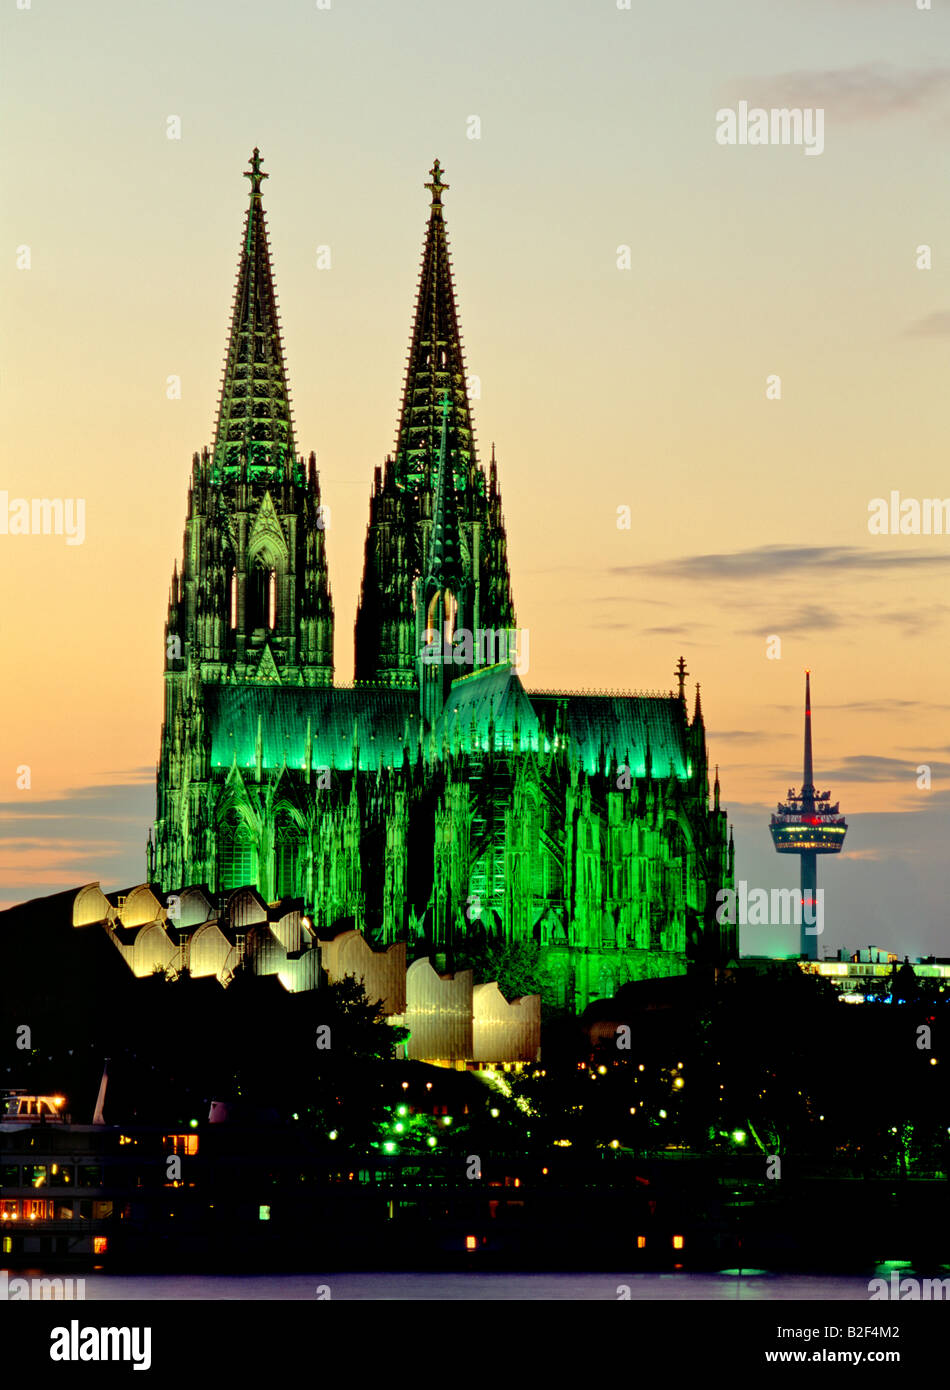 Koln Cologne Cathedral twin spires silhouetted floodlit against evening sky seen across the River Rhine, Germany Stock Photo